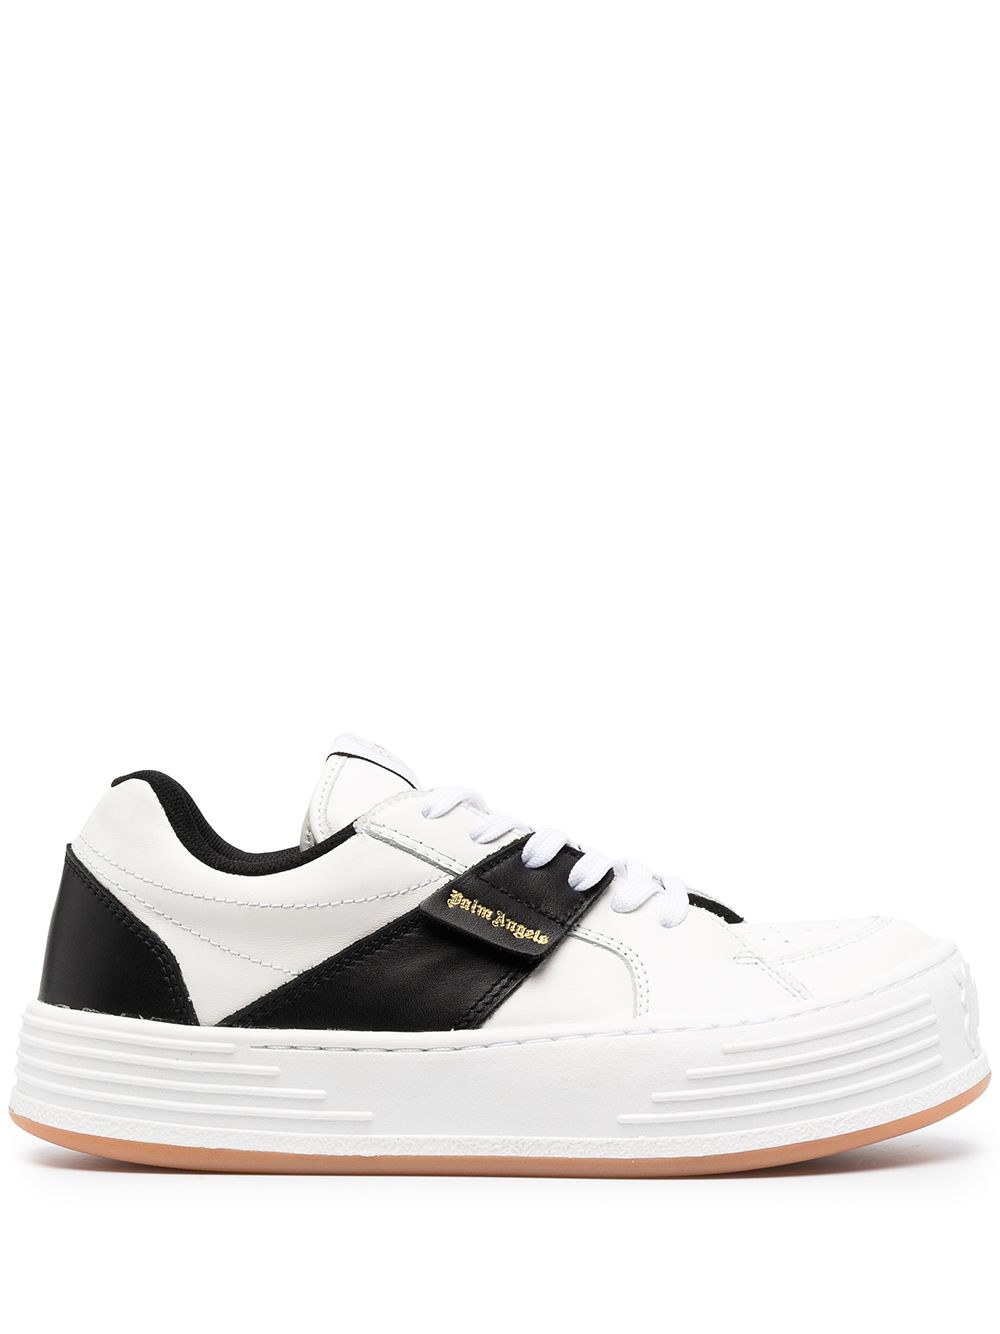 Snow Leather Sneakers мъжки обувки Palm Angels 847485557_39